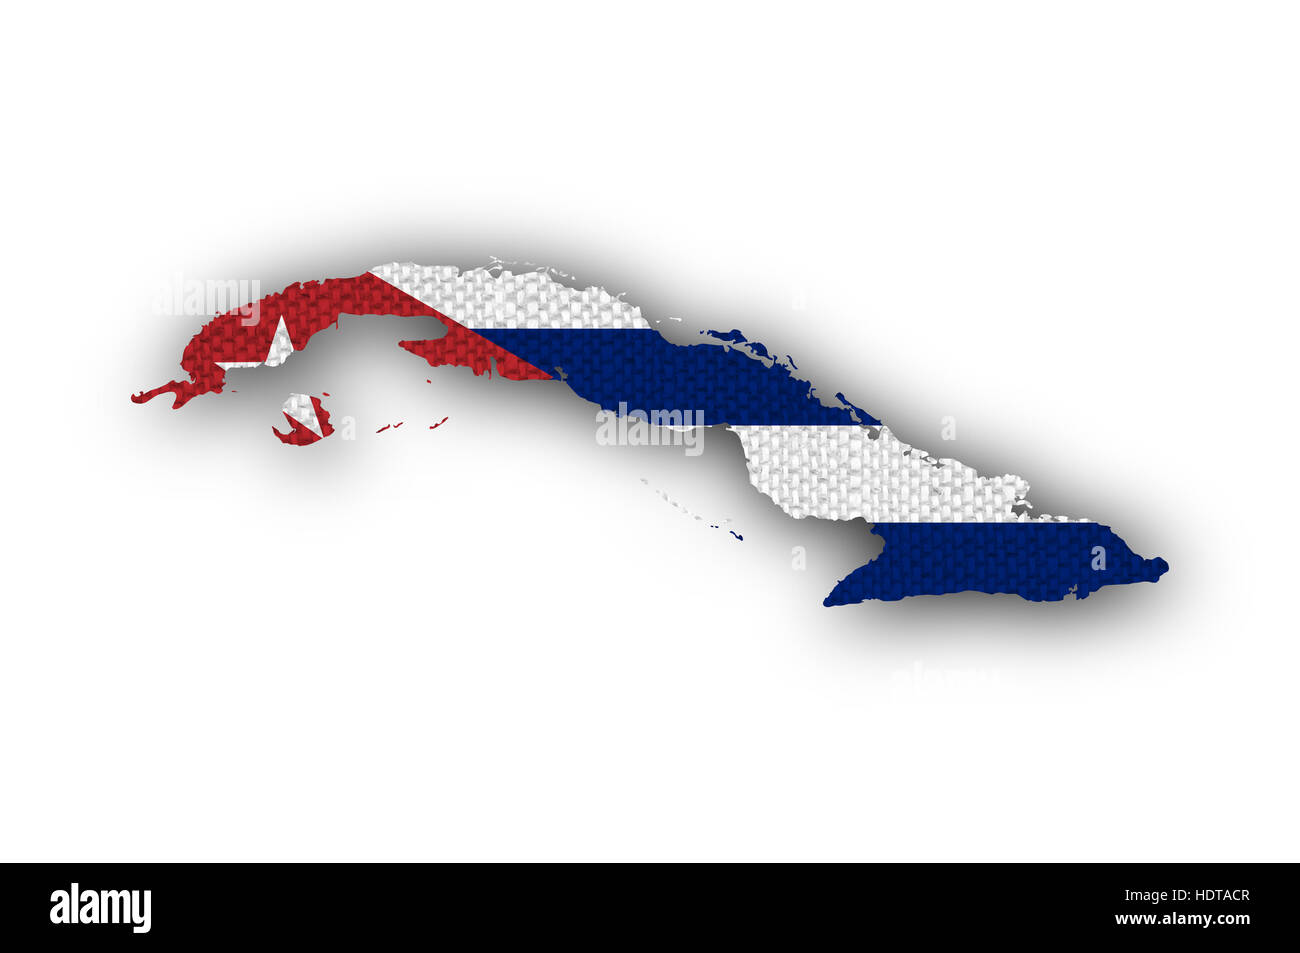 Map and flag of Cuba on old linen Stock Photo